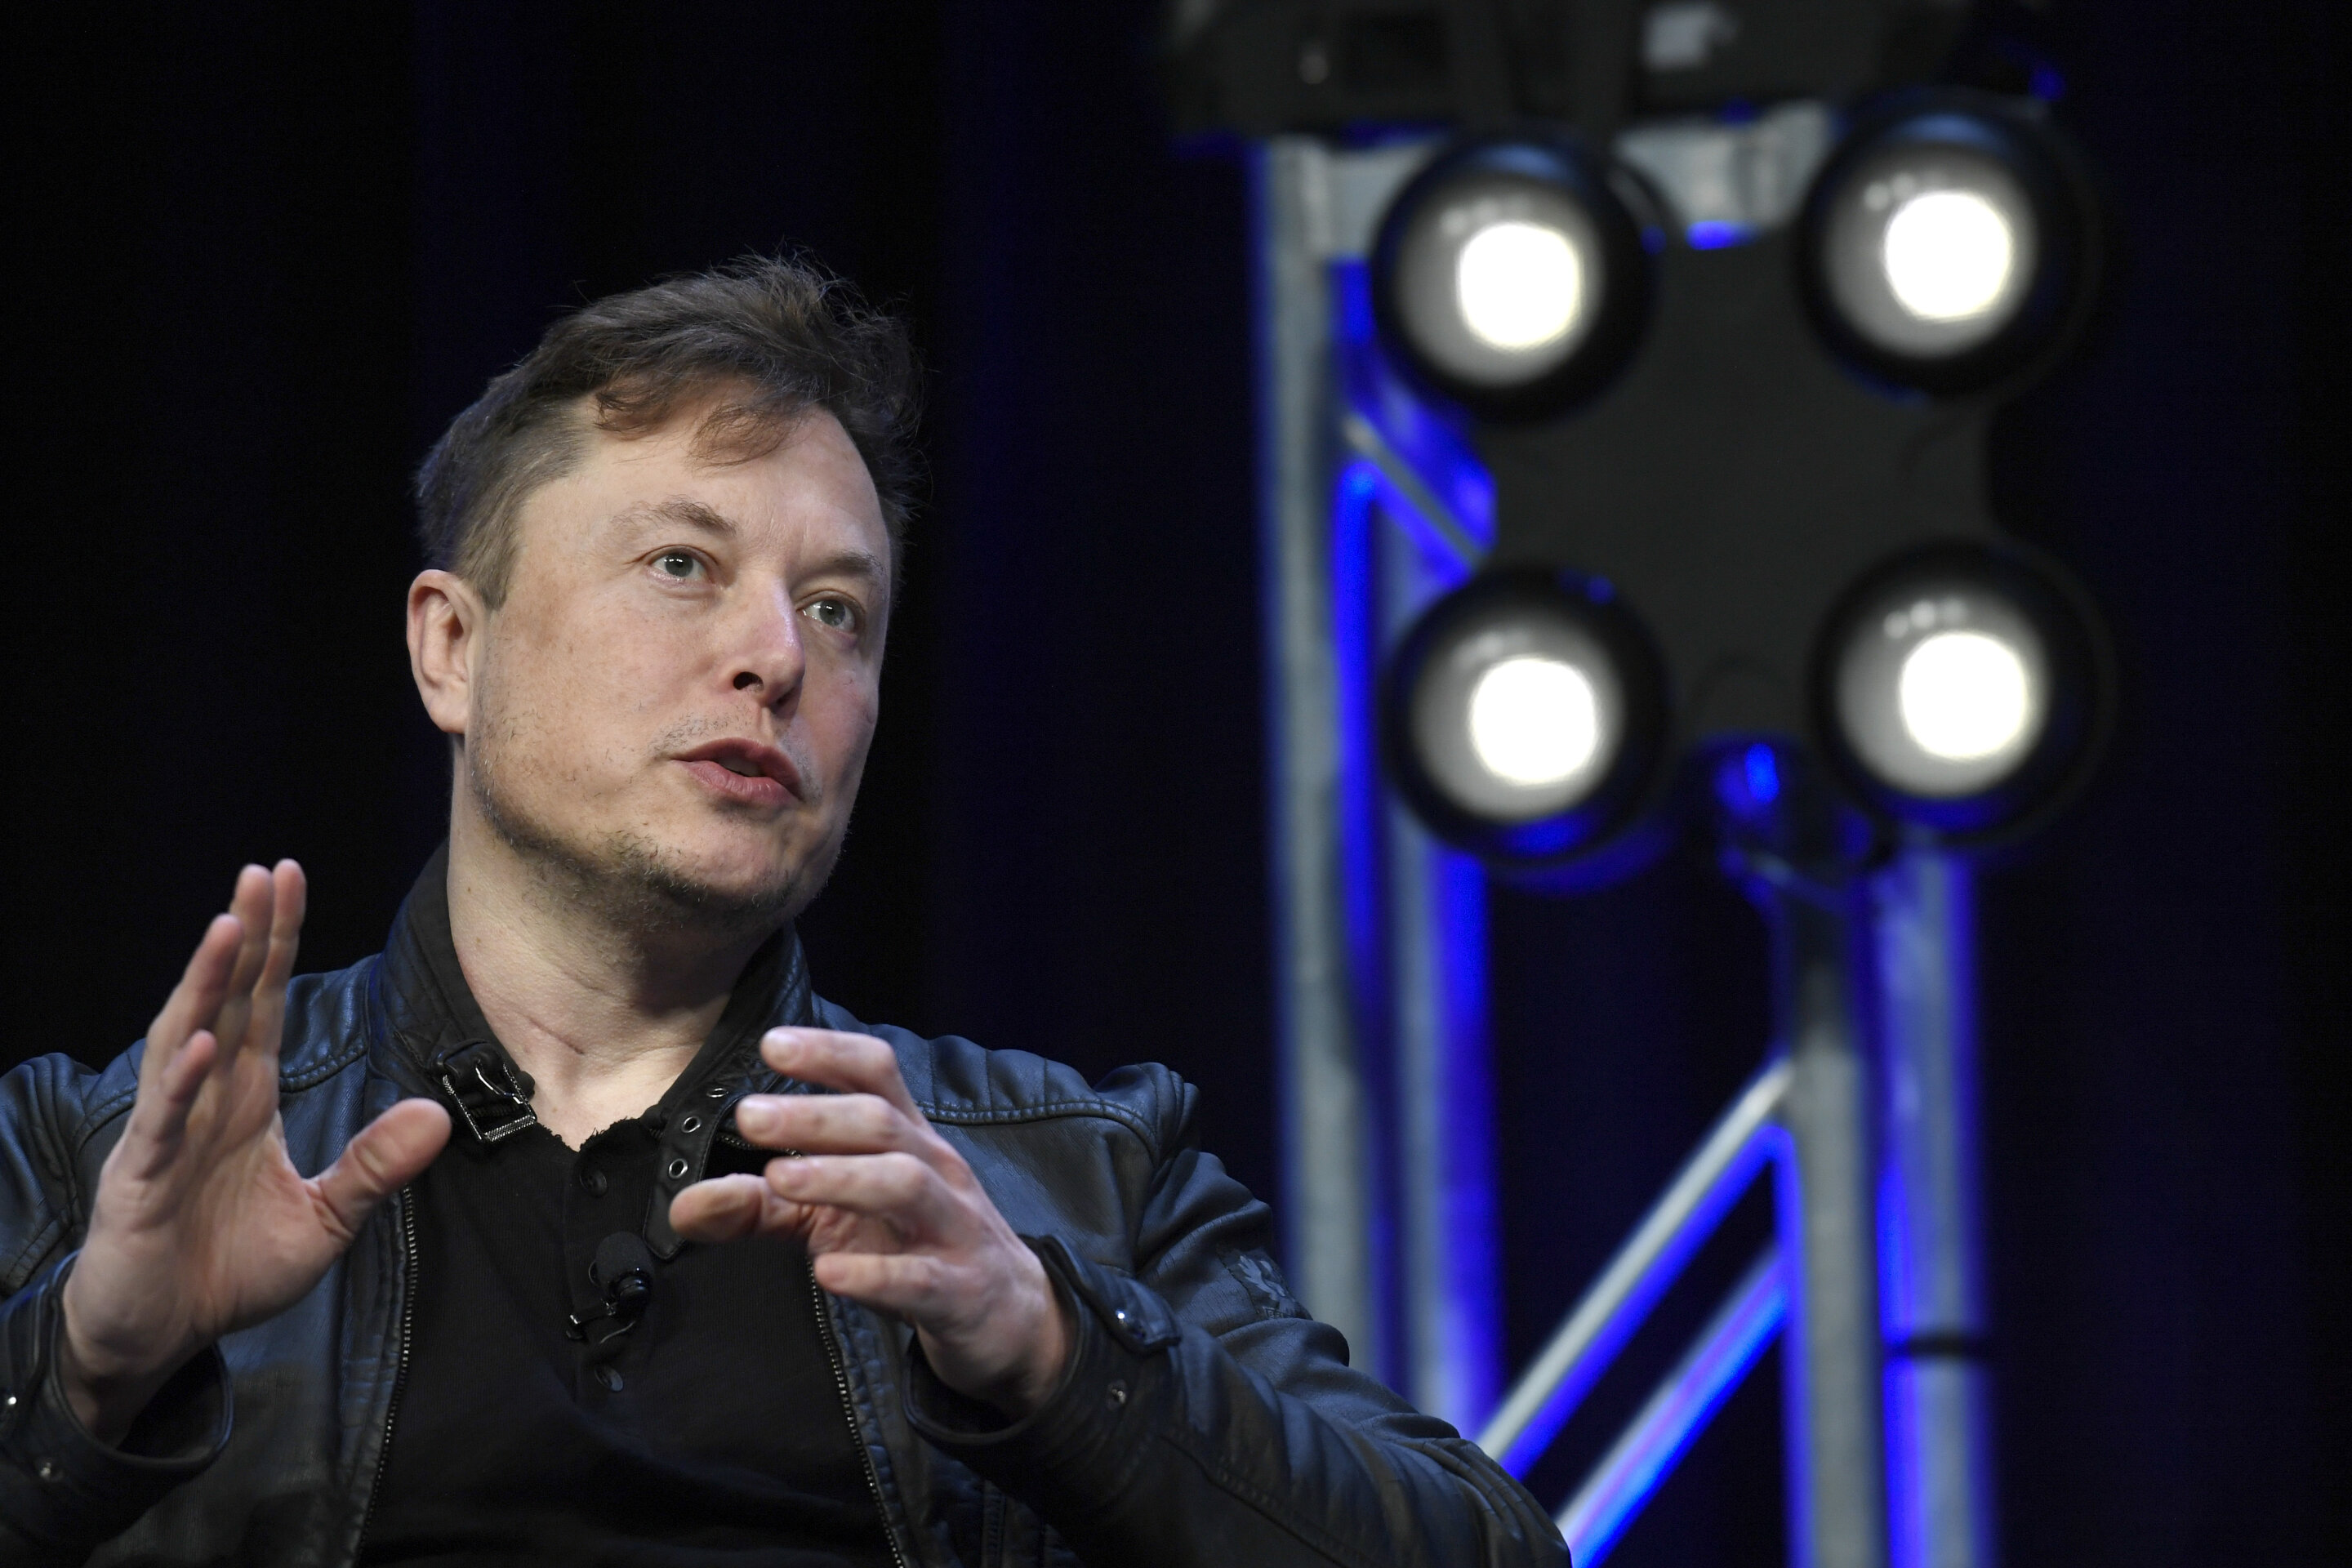 SEC says it’s not violating Elon Musk’s right to free speech